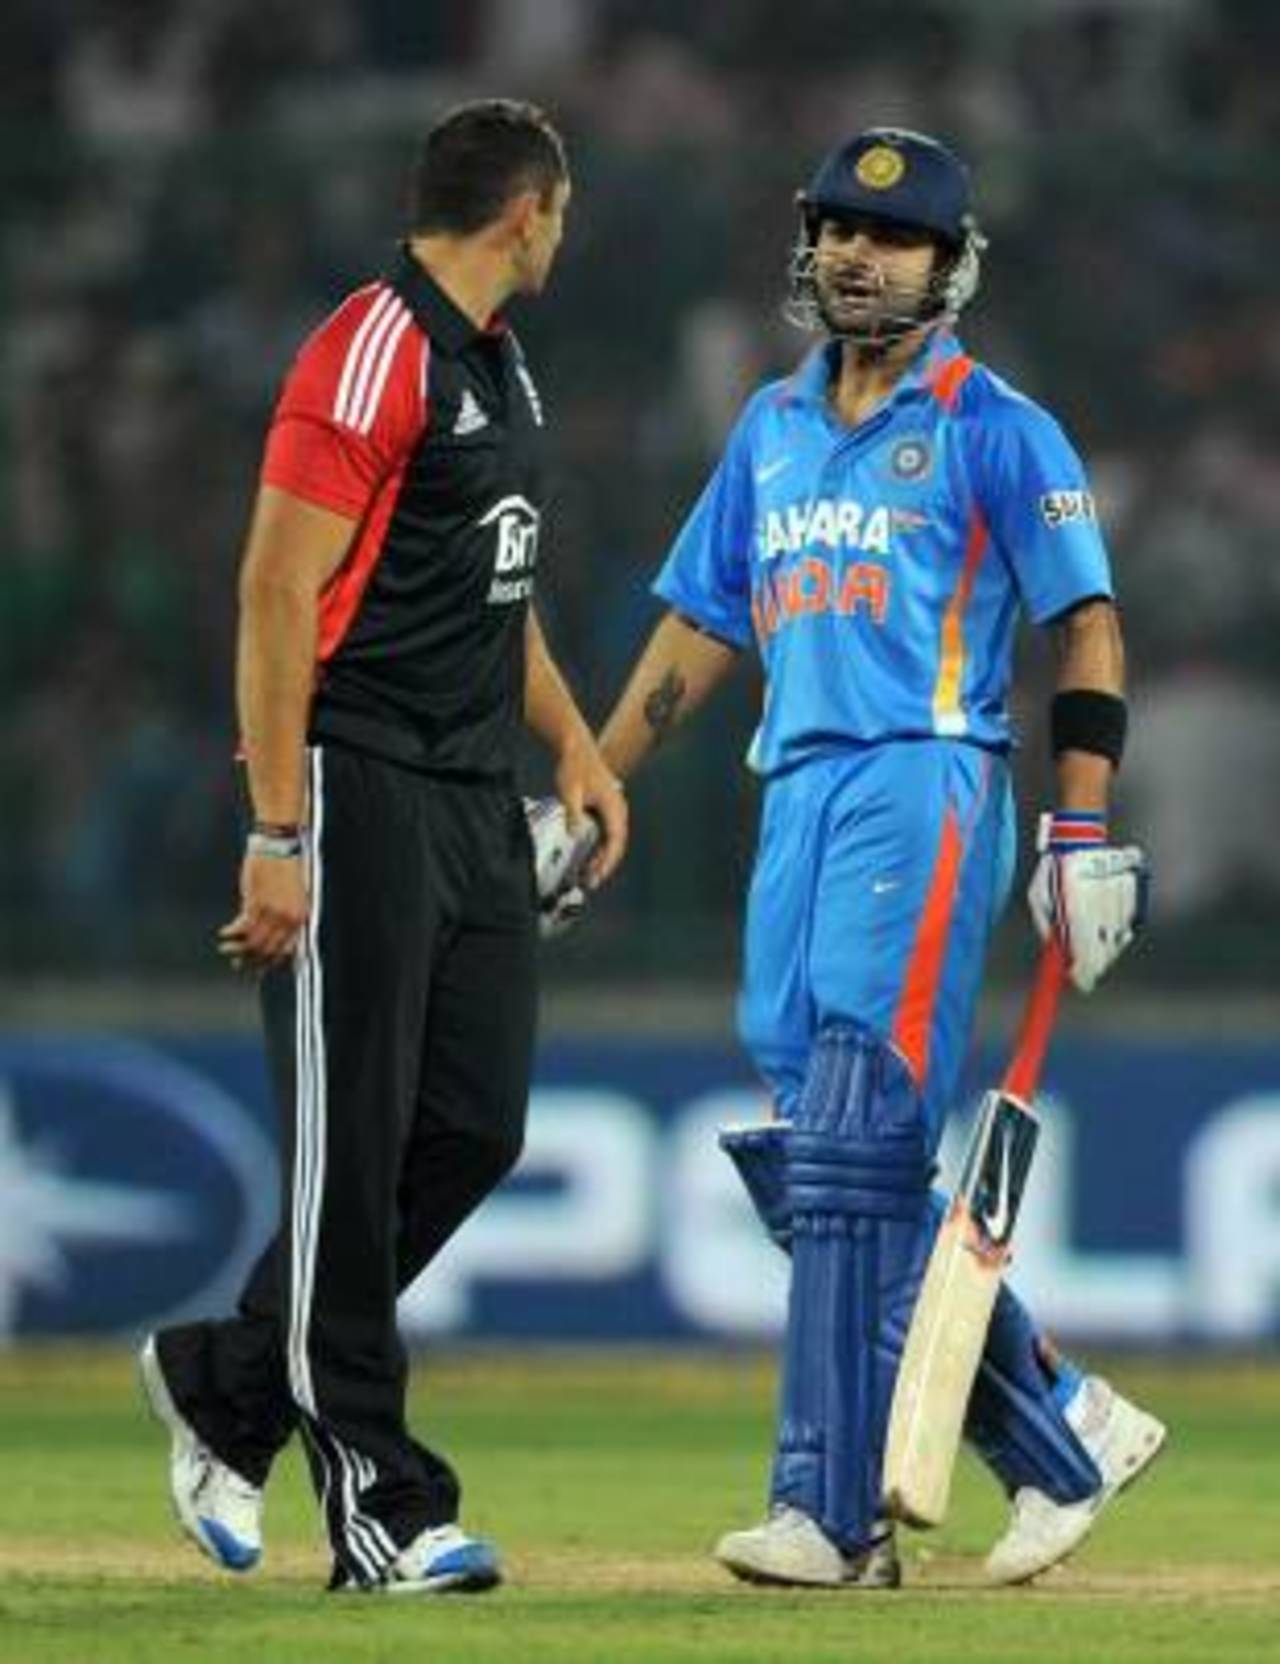 There were plenty of words between Virat Kohli and the England bowlers, India v England, 2nd ODI, Delhi, October 17 2011